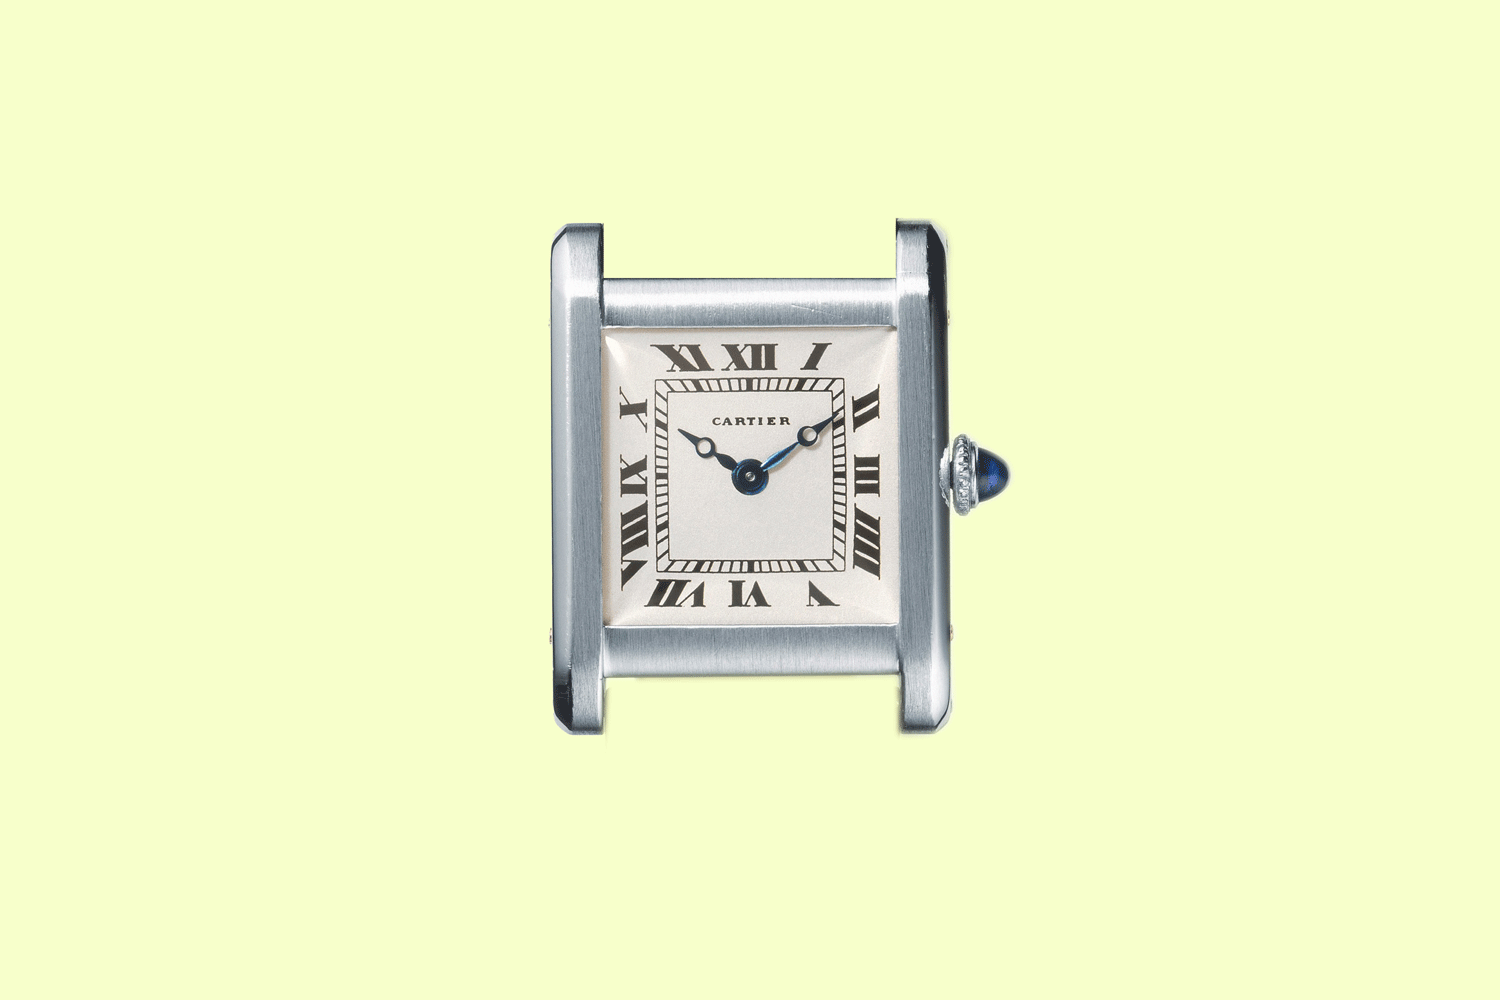 Conceived by Louis Cartier, the Tank wristwatch embodies the perfect balance between classicism and modernity. Here, function becomes form. The hours are written in Roman numerals, as in clocks of the 17th century, while the square-shaped dial is thoroughly contemporary. The Tank watch is timeless, and its success constant and universal. The biggest Hollywood stars, such as Rudolph Valentino and Gary Cooper, and the most elegant ones, like Catherine Deneuve, wore it as a statement of style and freedom. Tank wristwatch Cartier Paris, 1920 Platinum, gold, One sapphire cabochon, Leather strap. Dimensions of the case: 2.96 x 2.30 cm. © Cartier